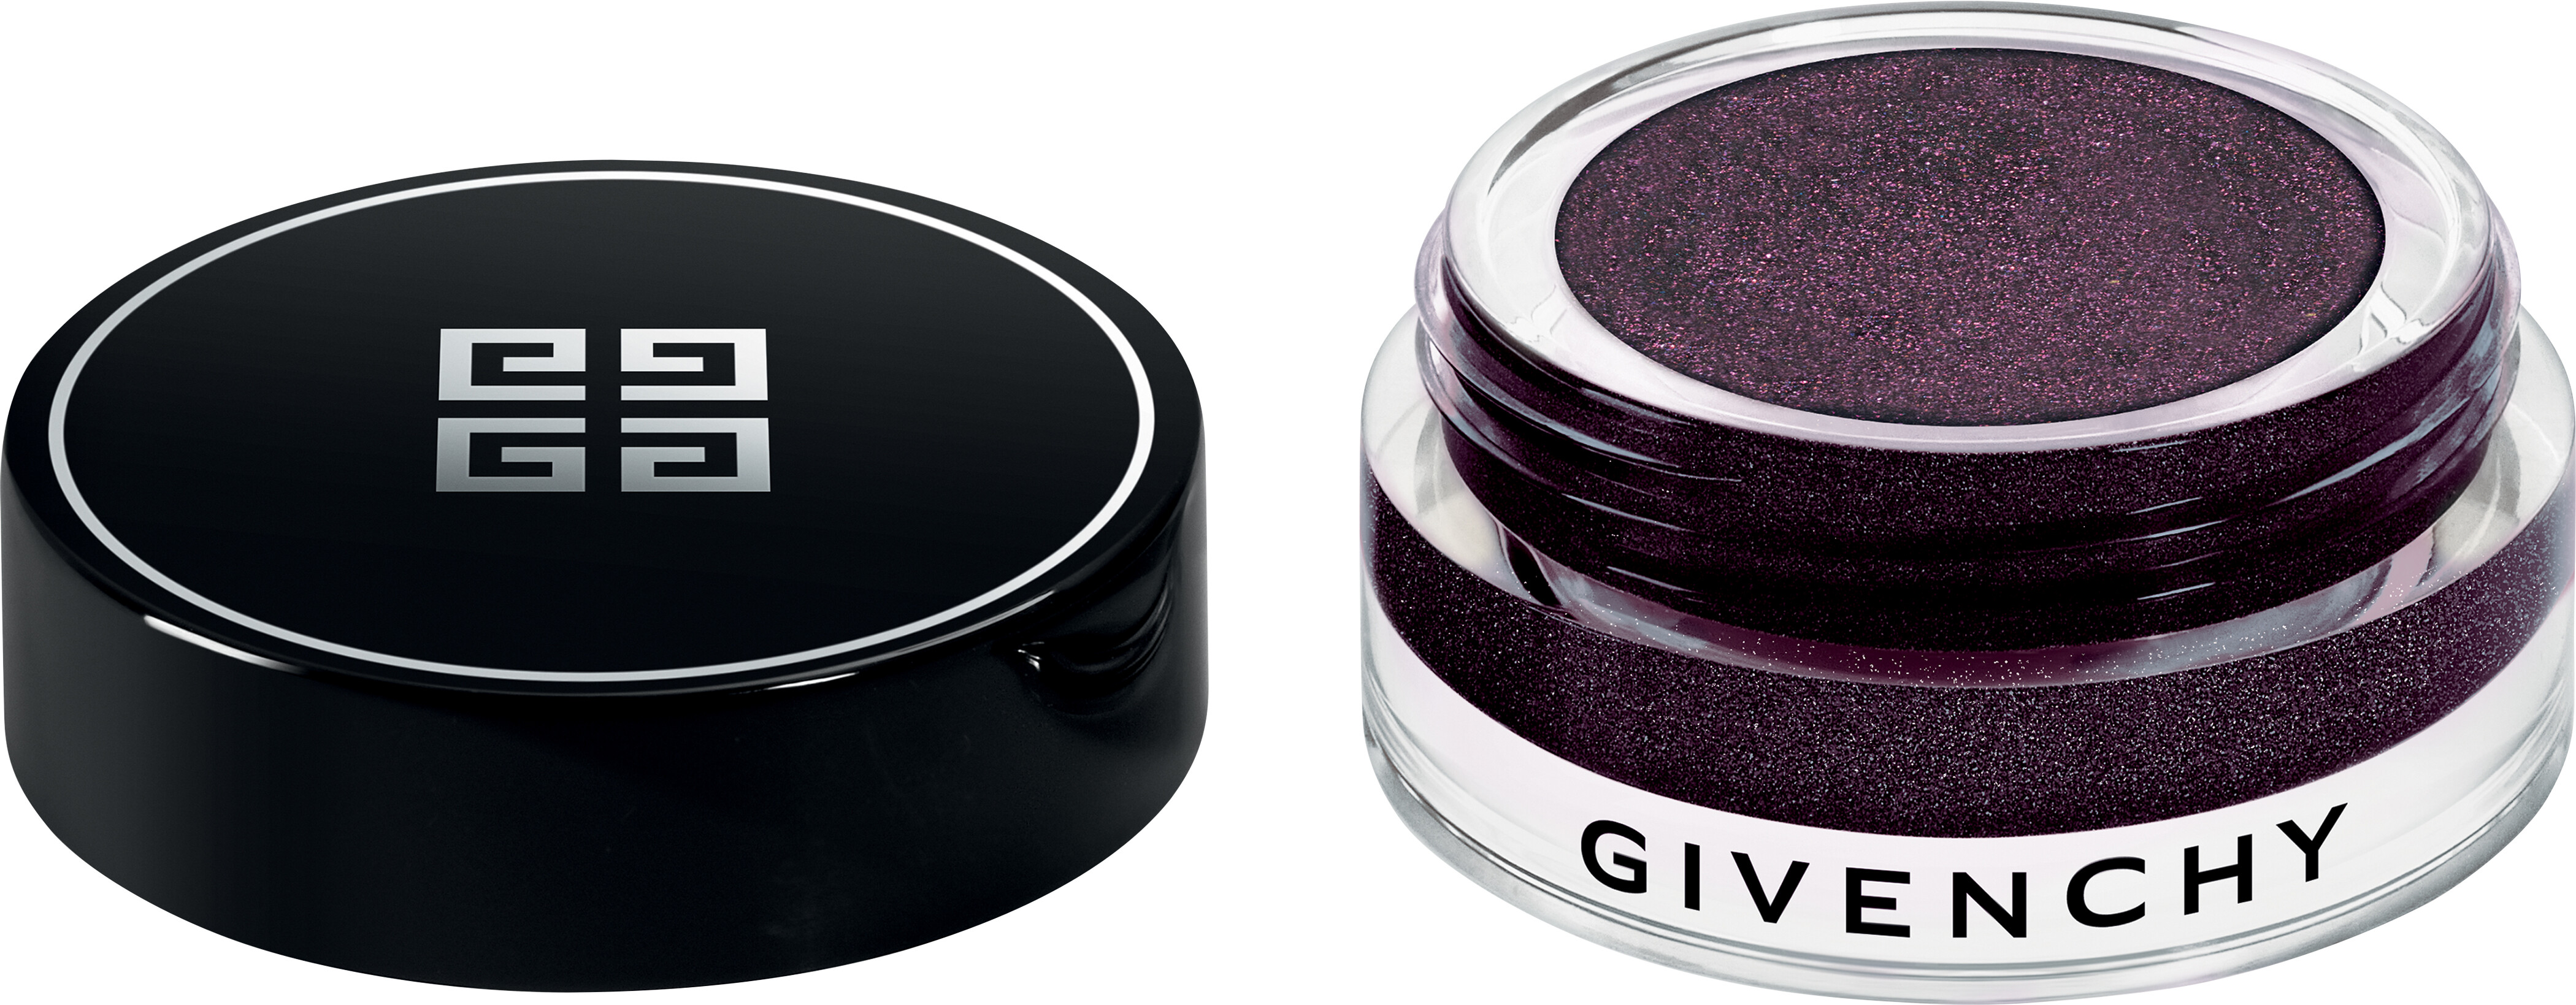 GIVENCHY Ombre Couture Cream Eyeshadow 4g 20 - Rosy Black